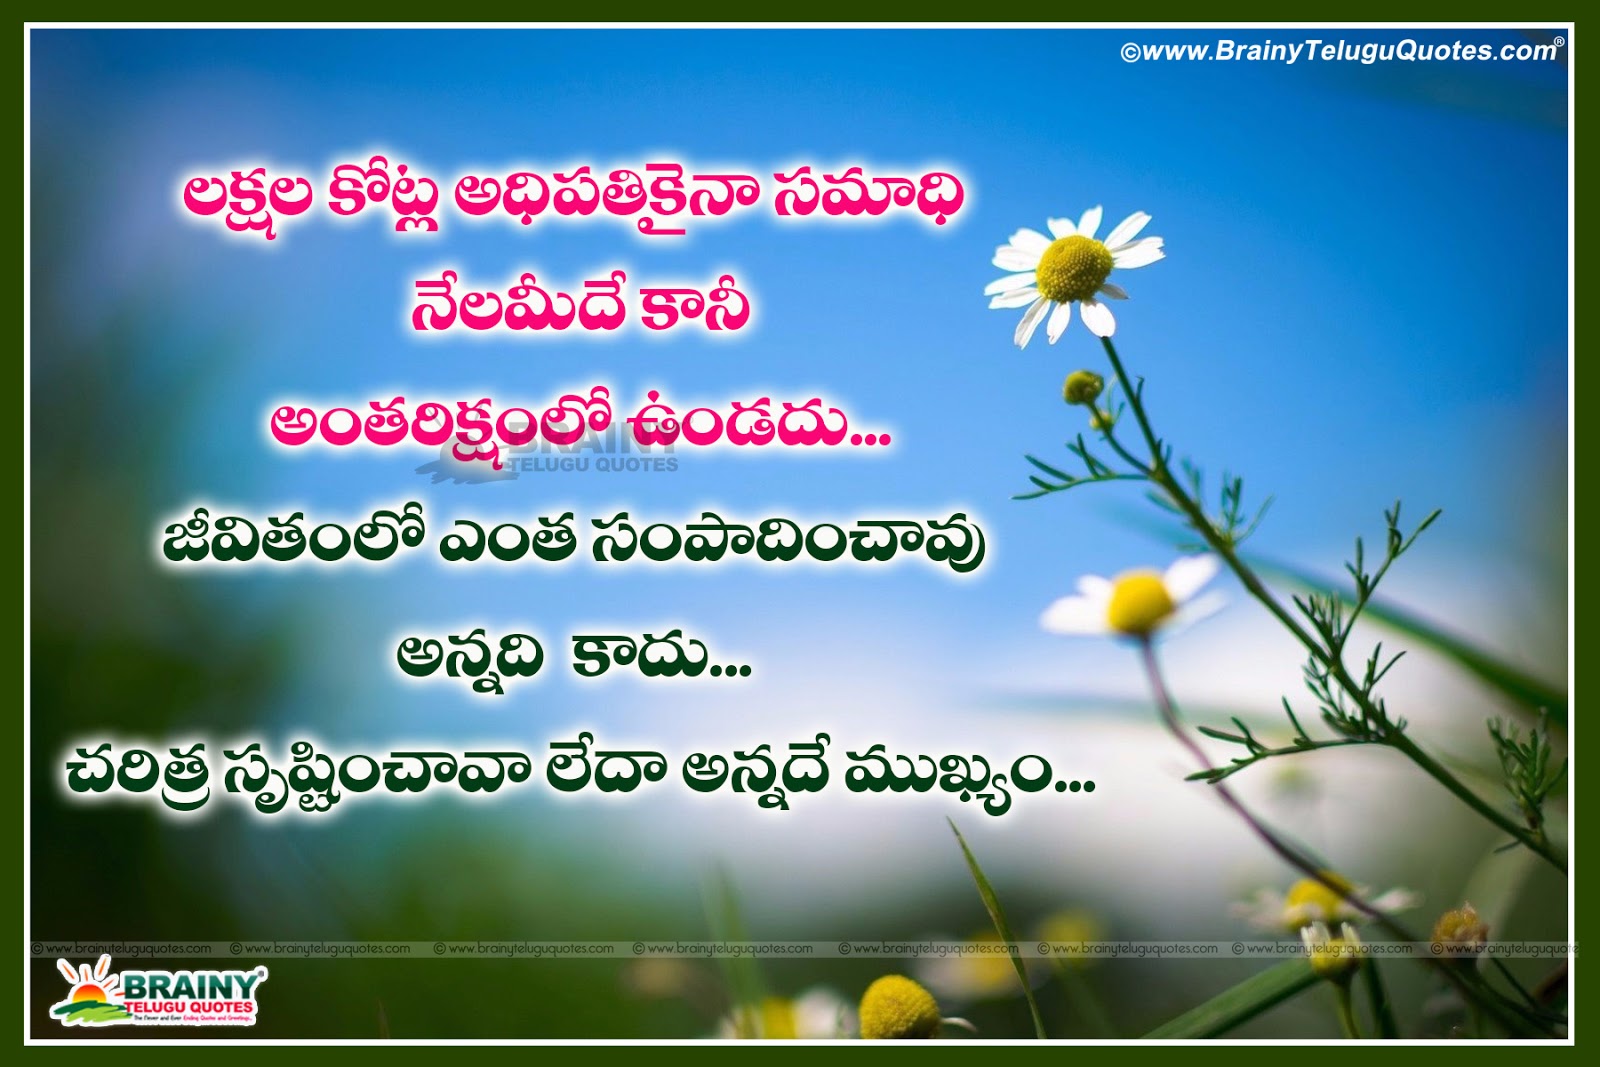 Life Changing Quotes With Images In Telugu The Emoji